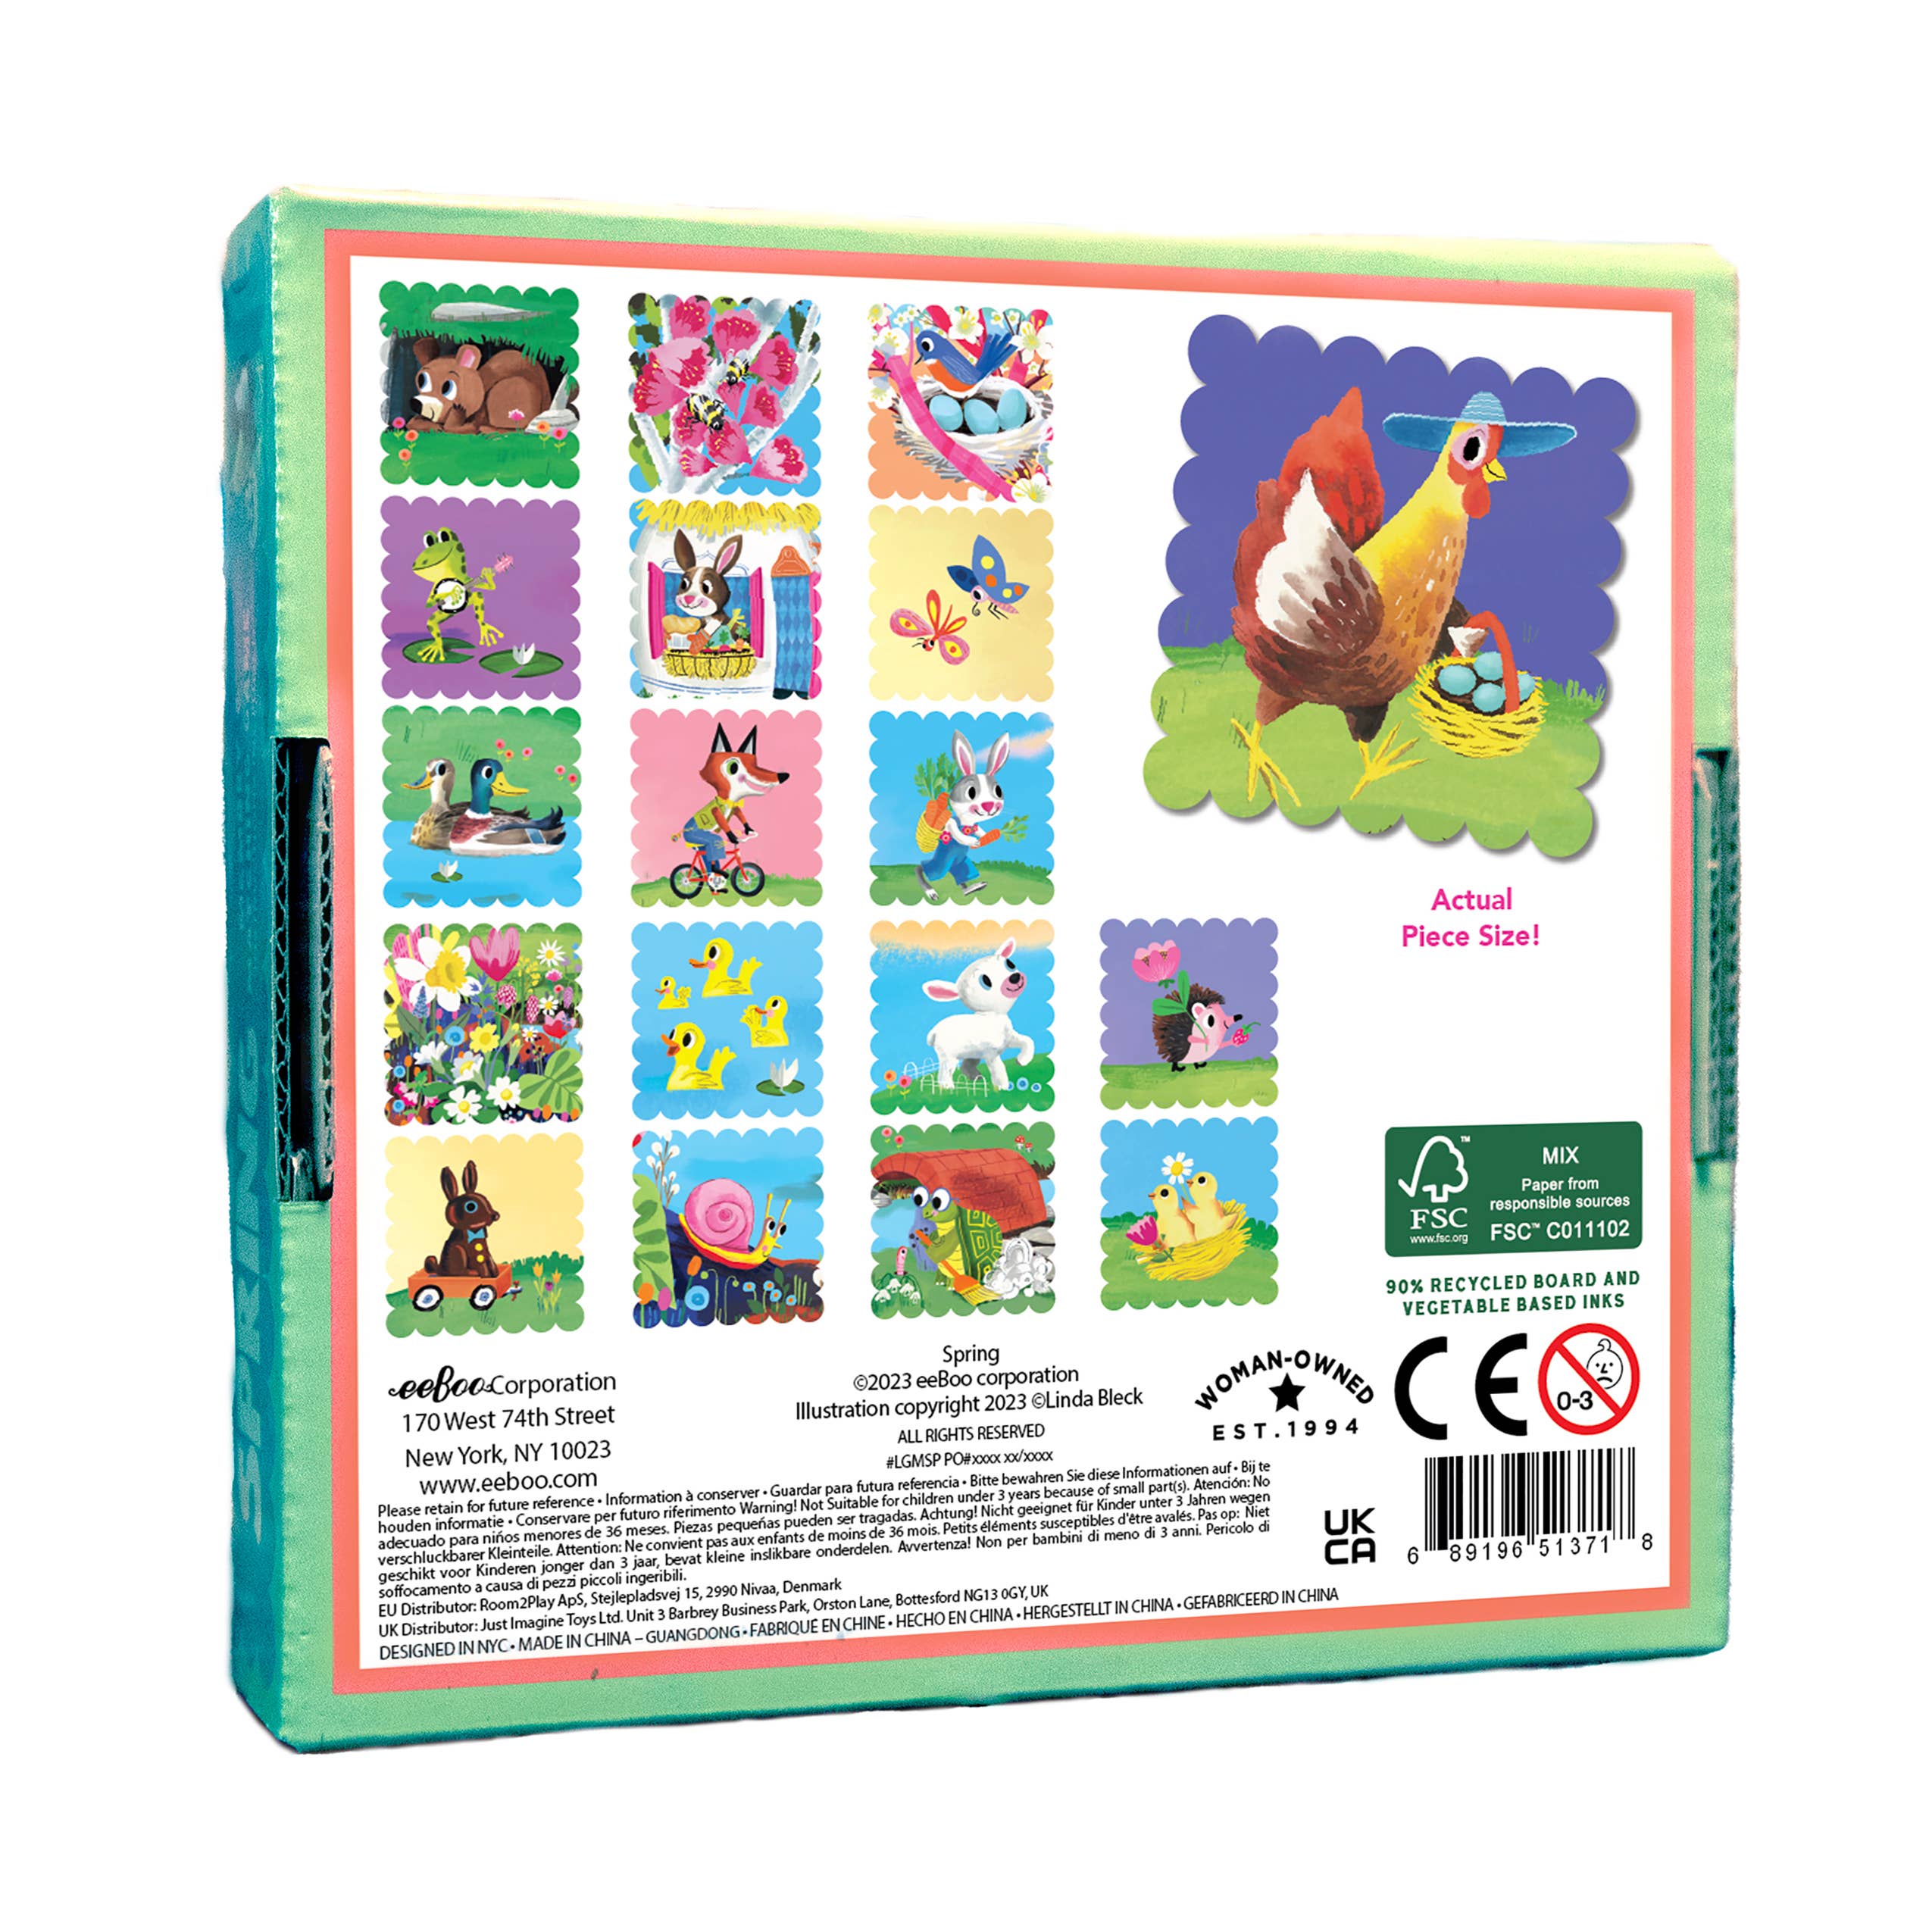 eeBoo - Spring Little Square Memory Game